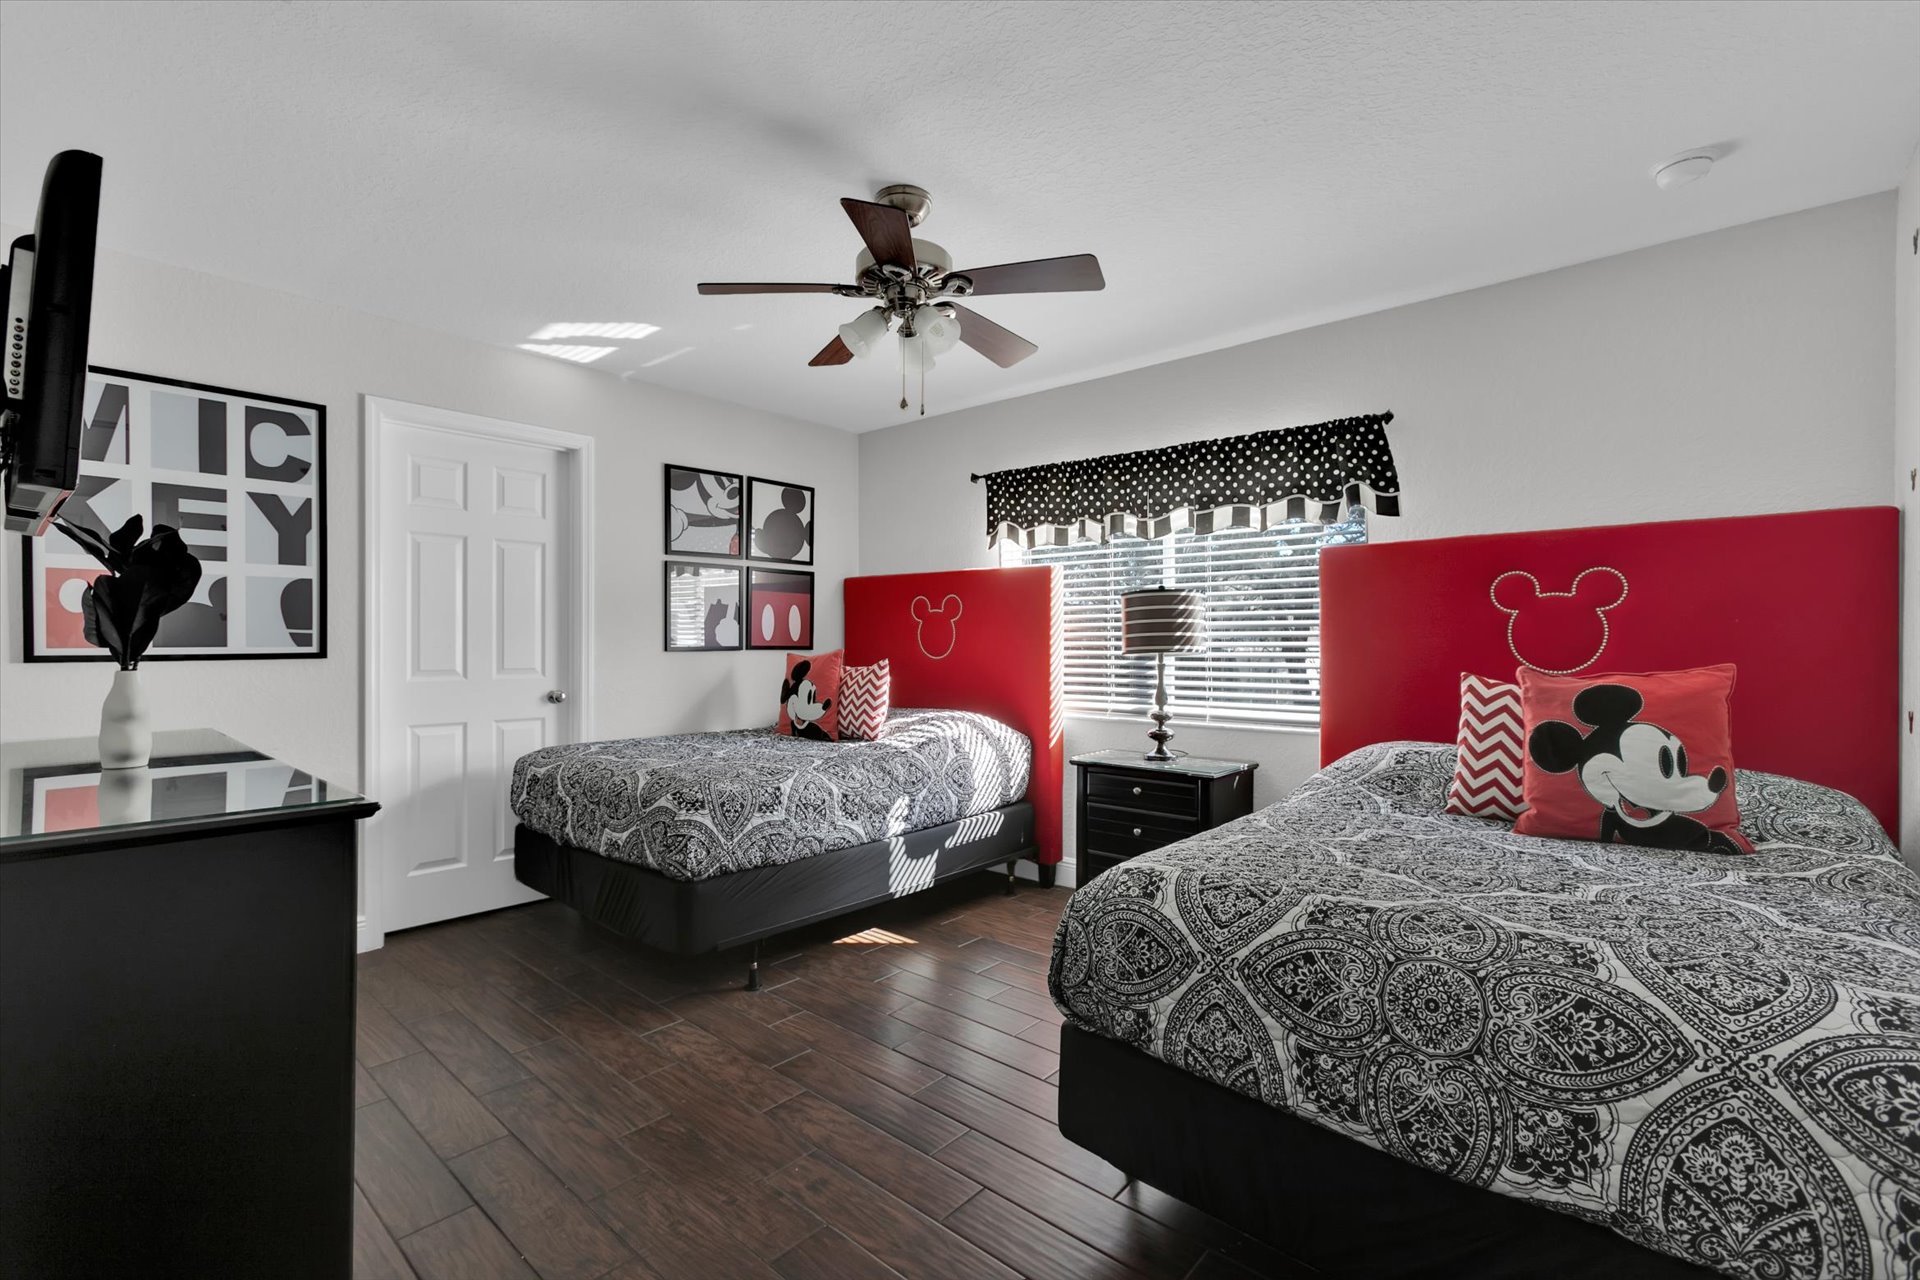 Two Doubles Bedroom 3 Upstairs
Mickey Theme